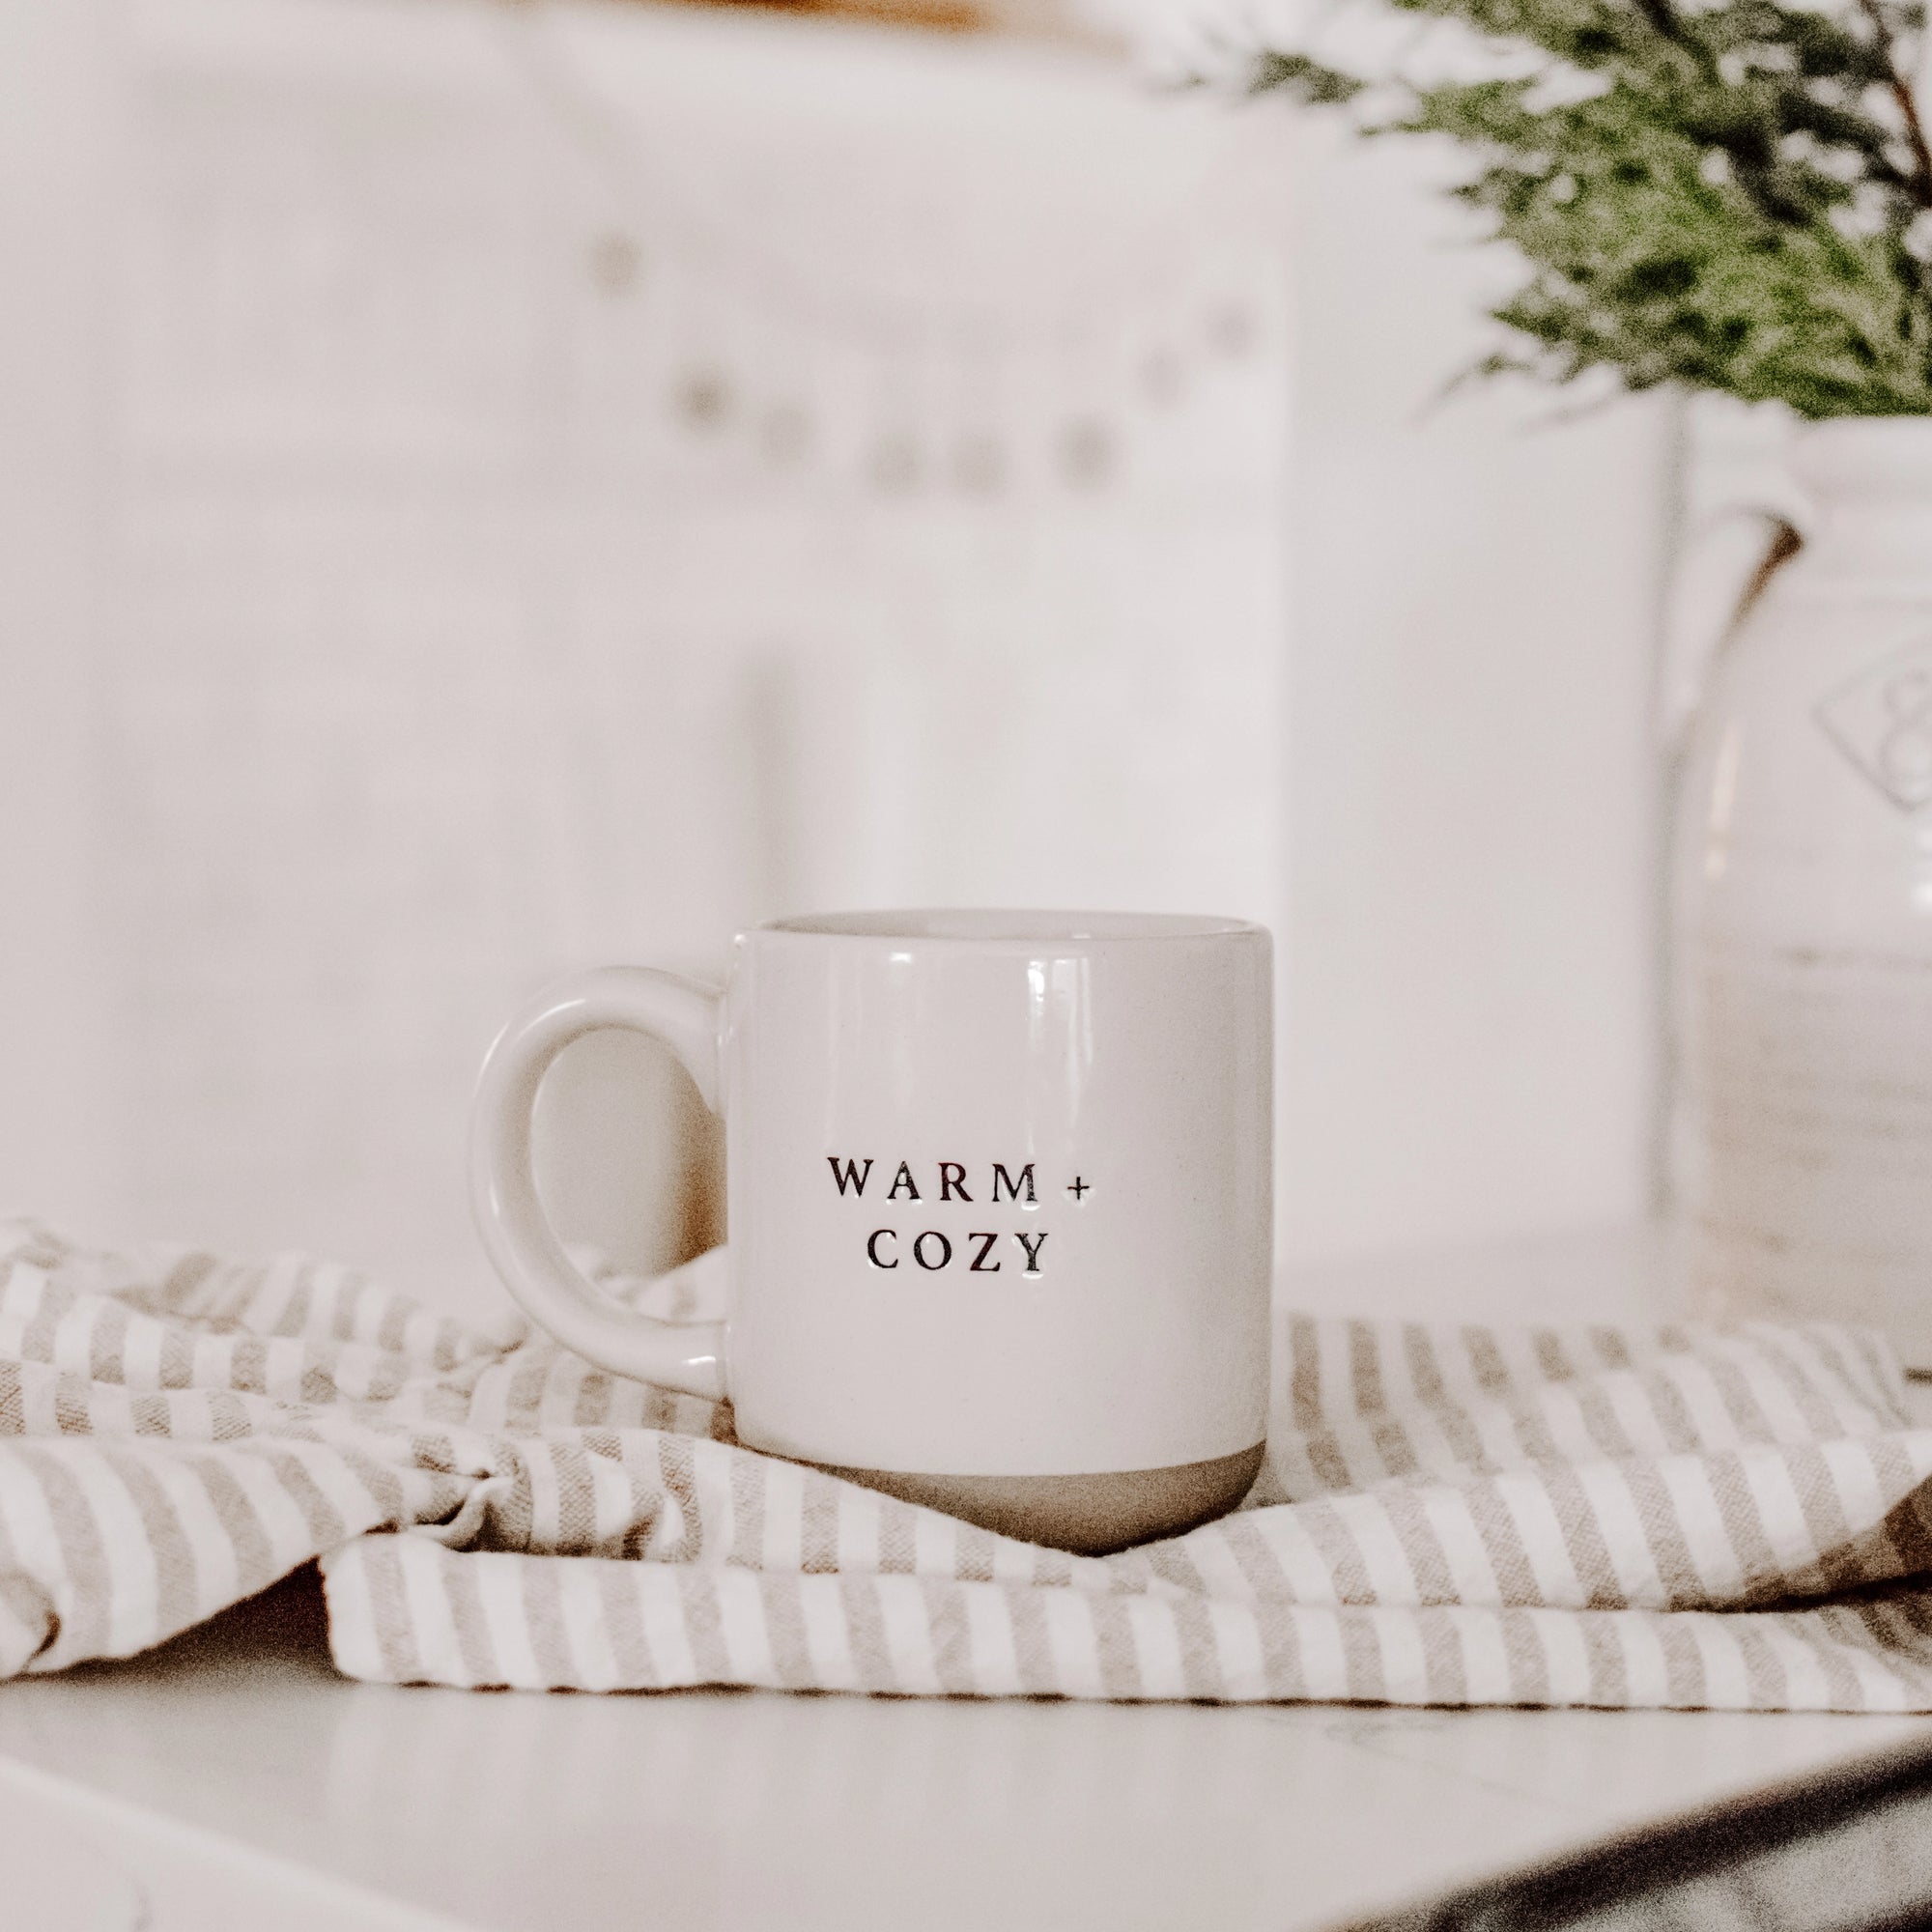 Cream and brown stoneware mug with black text 'warm + cozy' on the front, on striped tea towel.